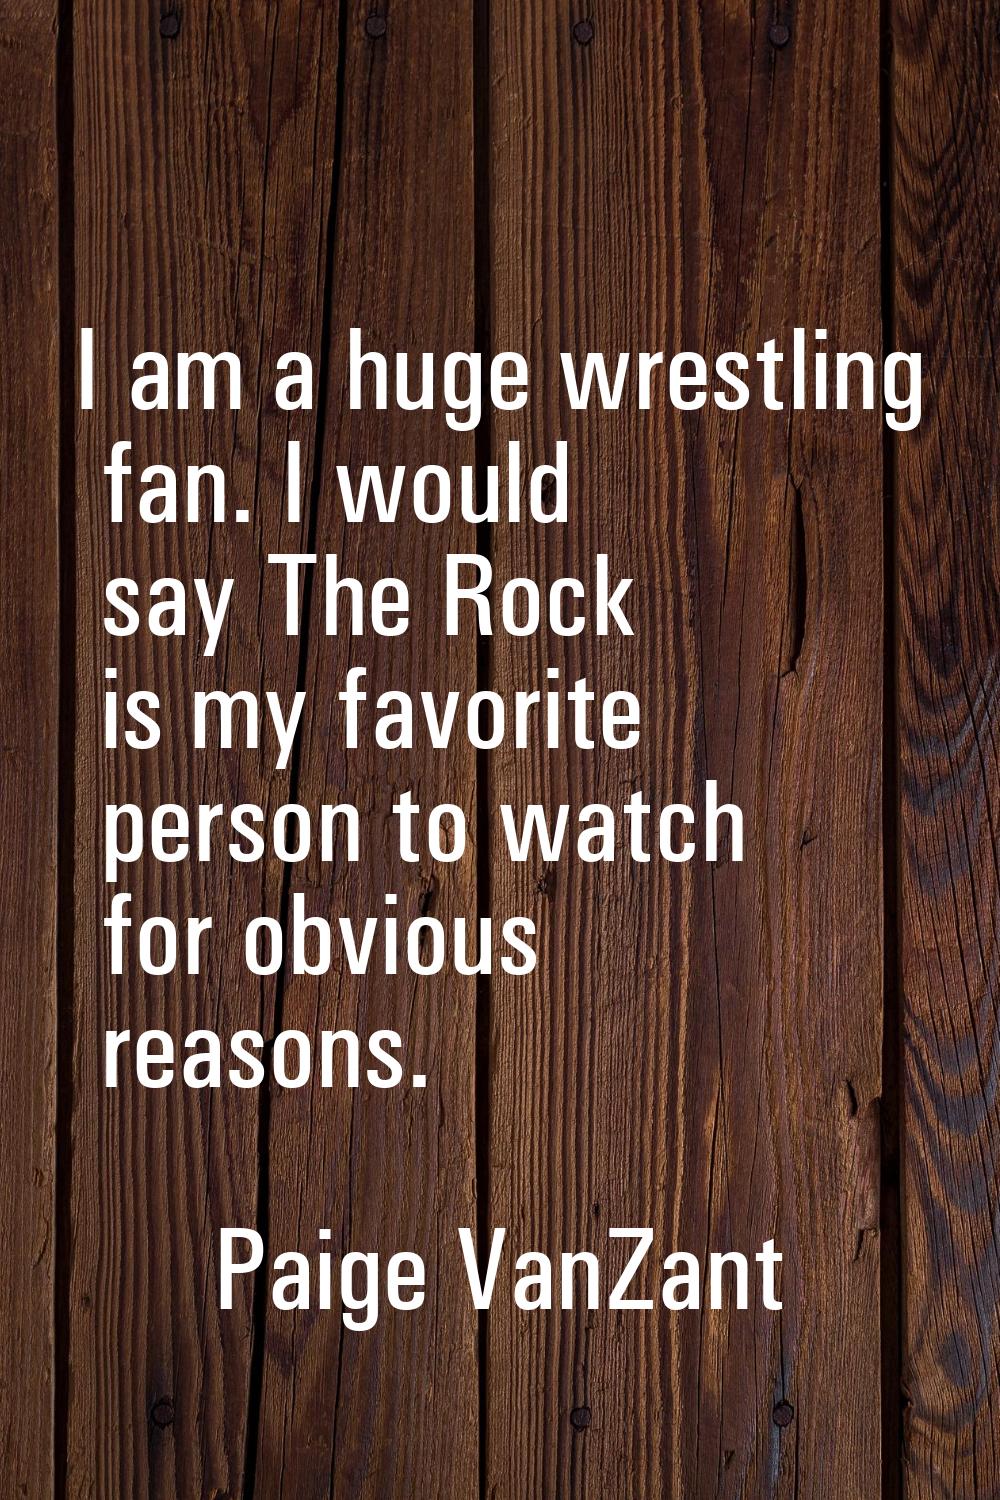 I am a huge wrestling fan. I would say The Rock is my favorite person to watch for obvious reasons.